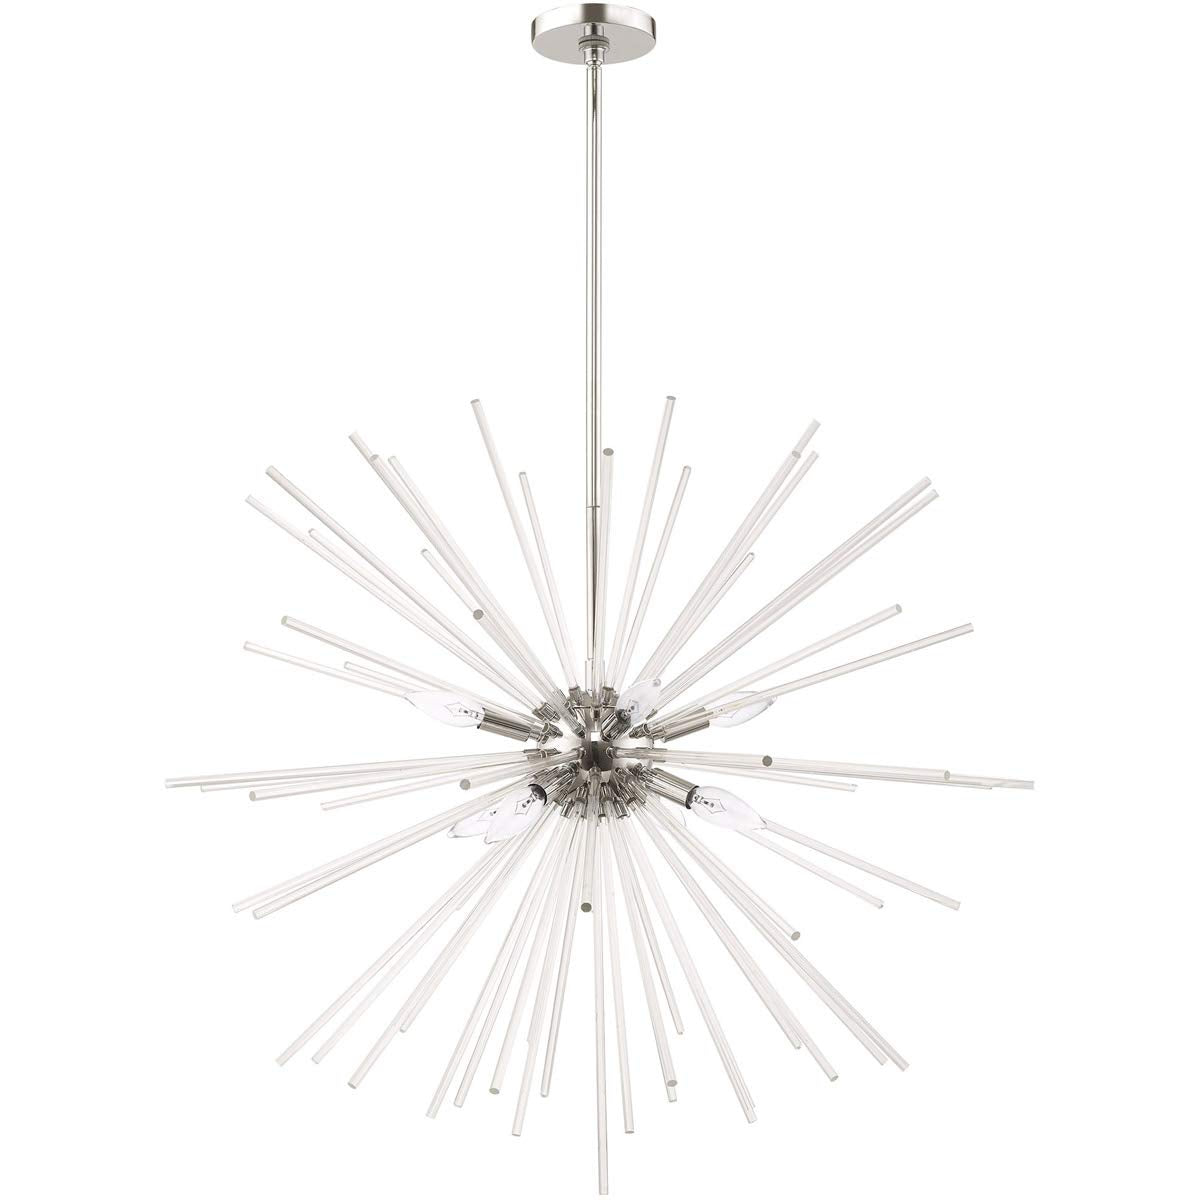 Livex Lighting 41258-05 Utopia - 34" Eight Light Chandelier, Polished Chrome Finish with Clear Rods Crystal